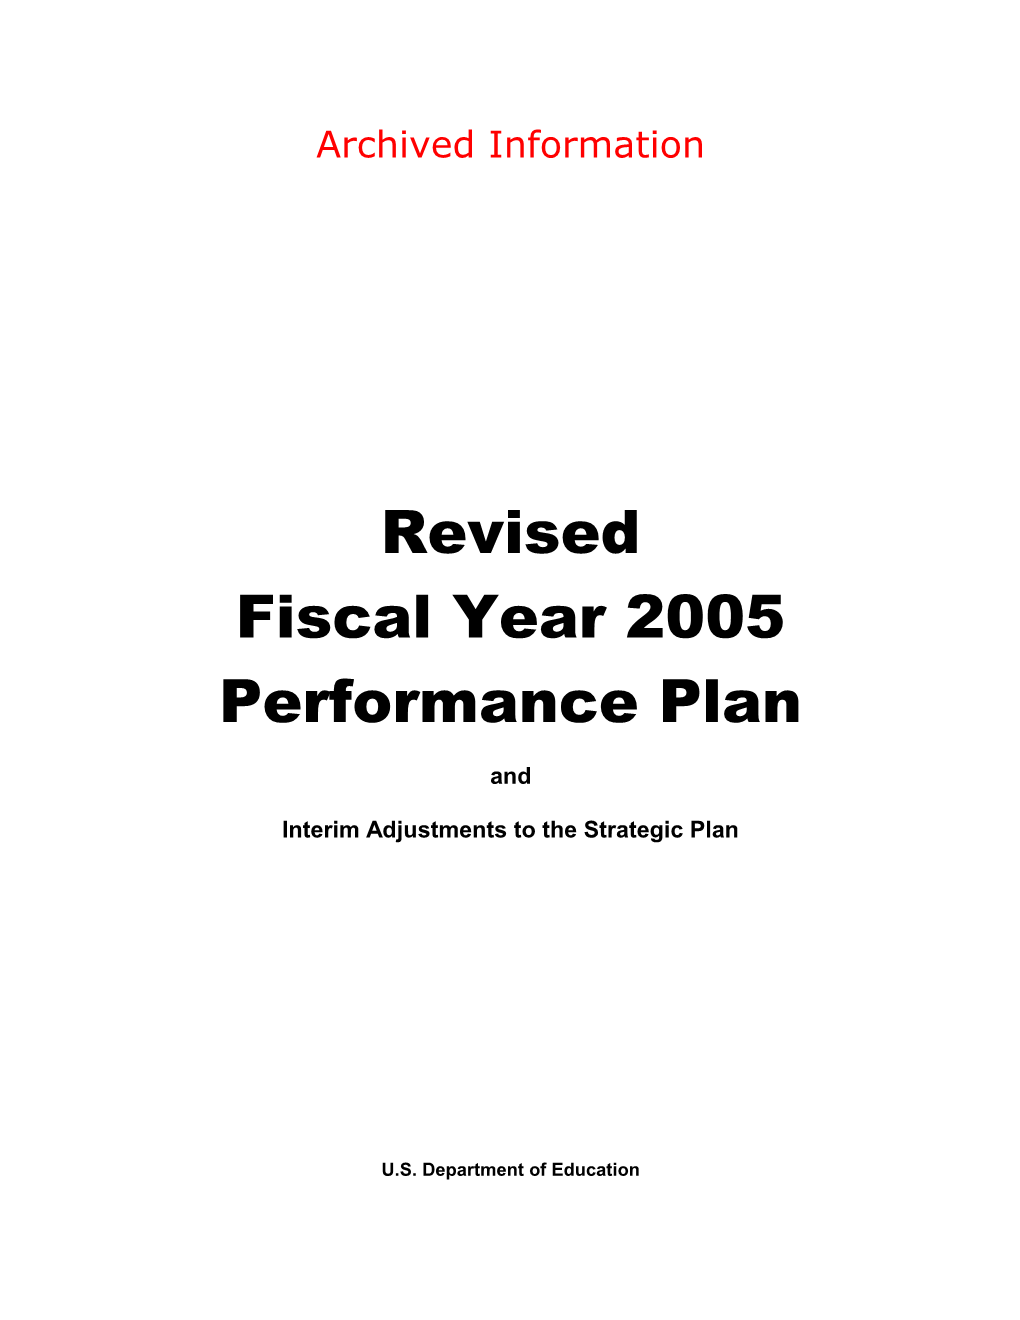 Archived: Revised Fiscal Year 2005 Performance Plan and Interim Adjustments to the Strategic